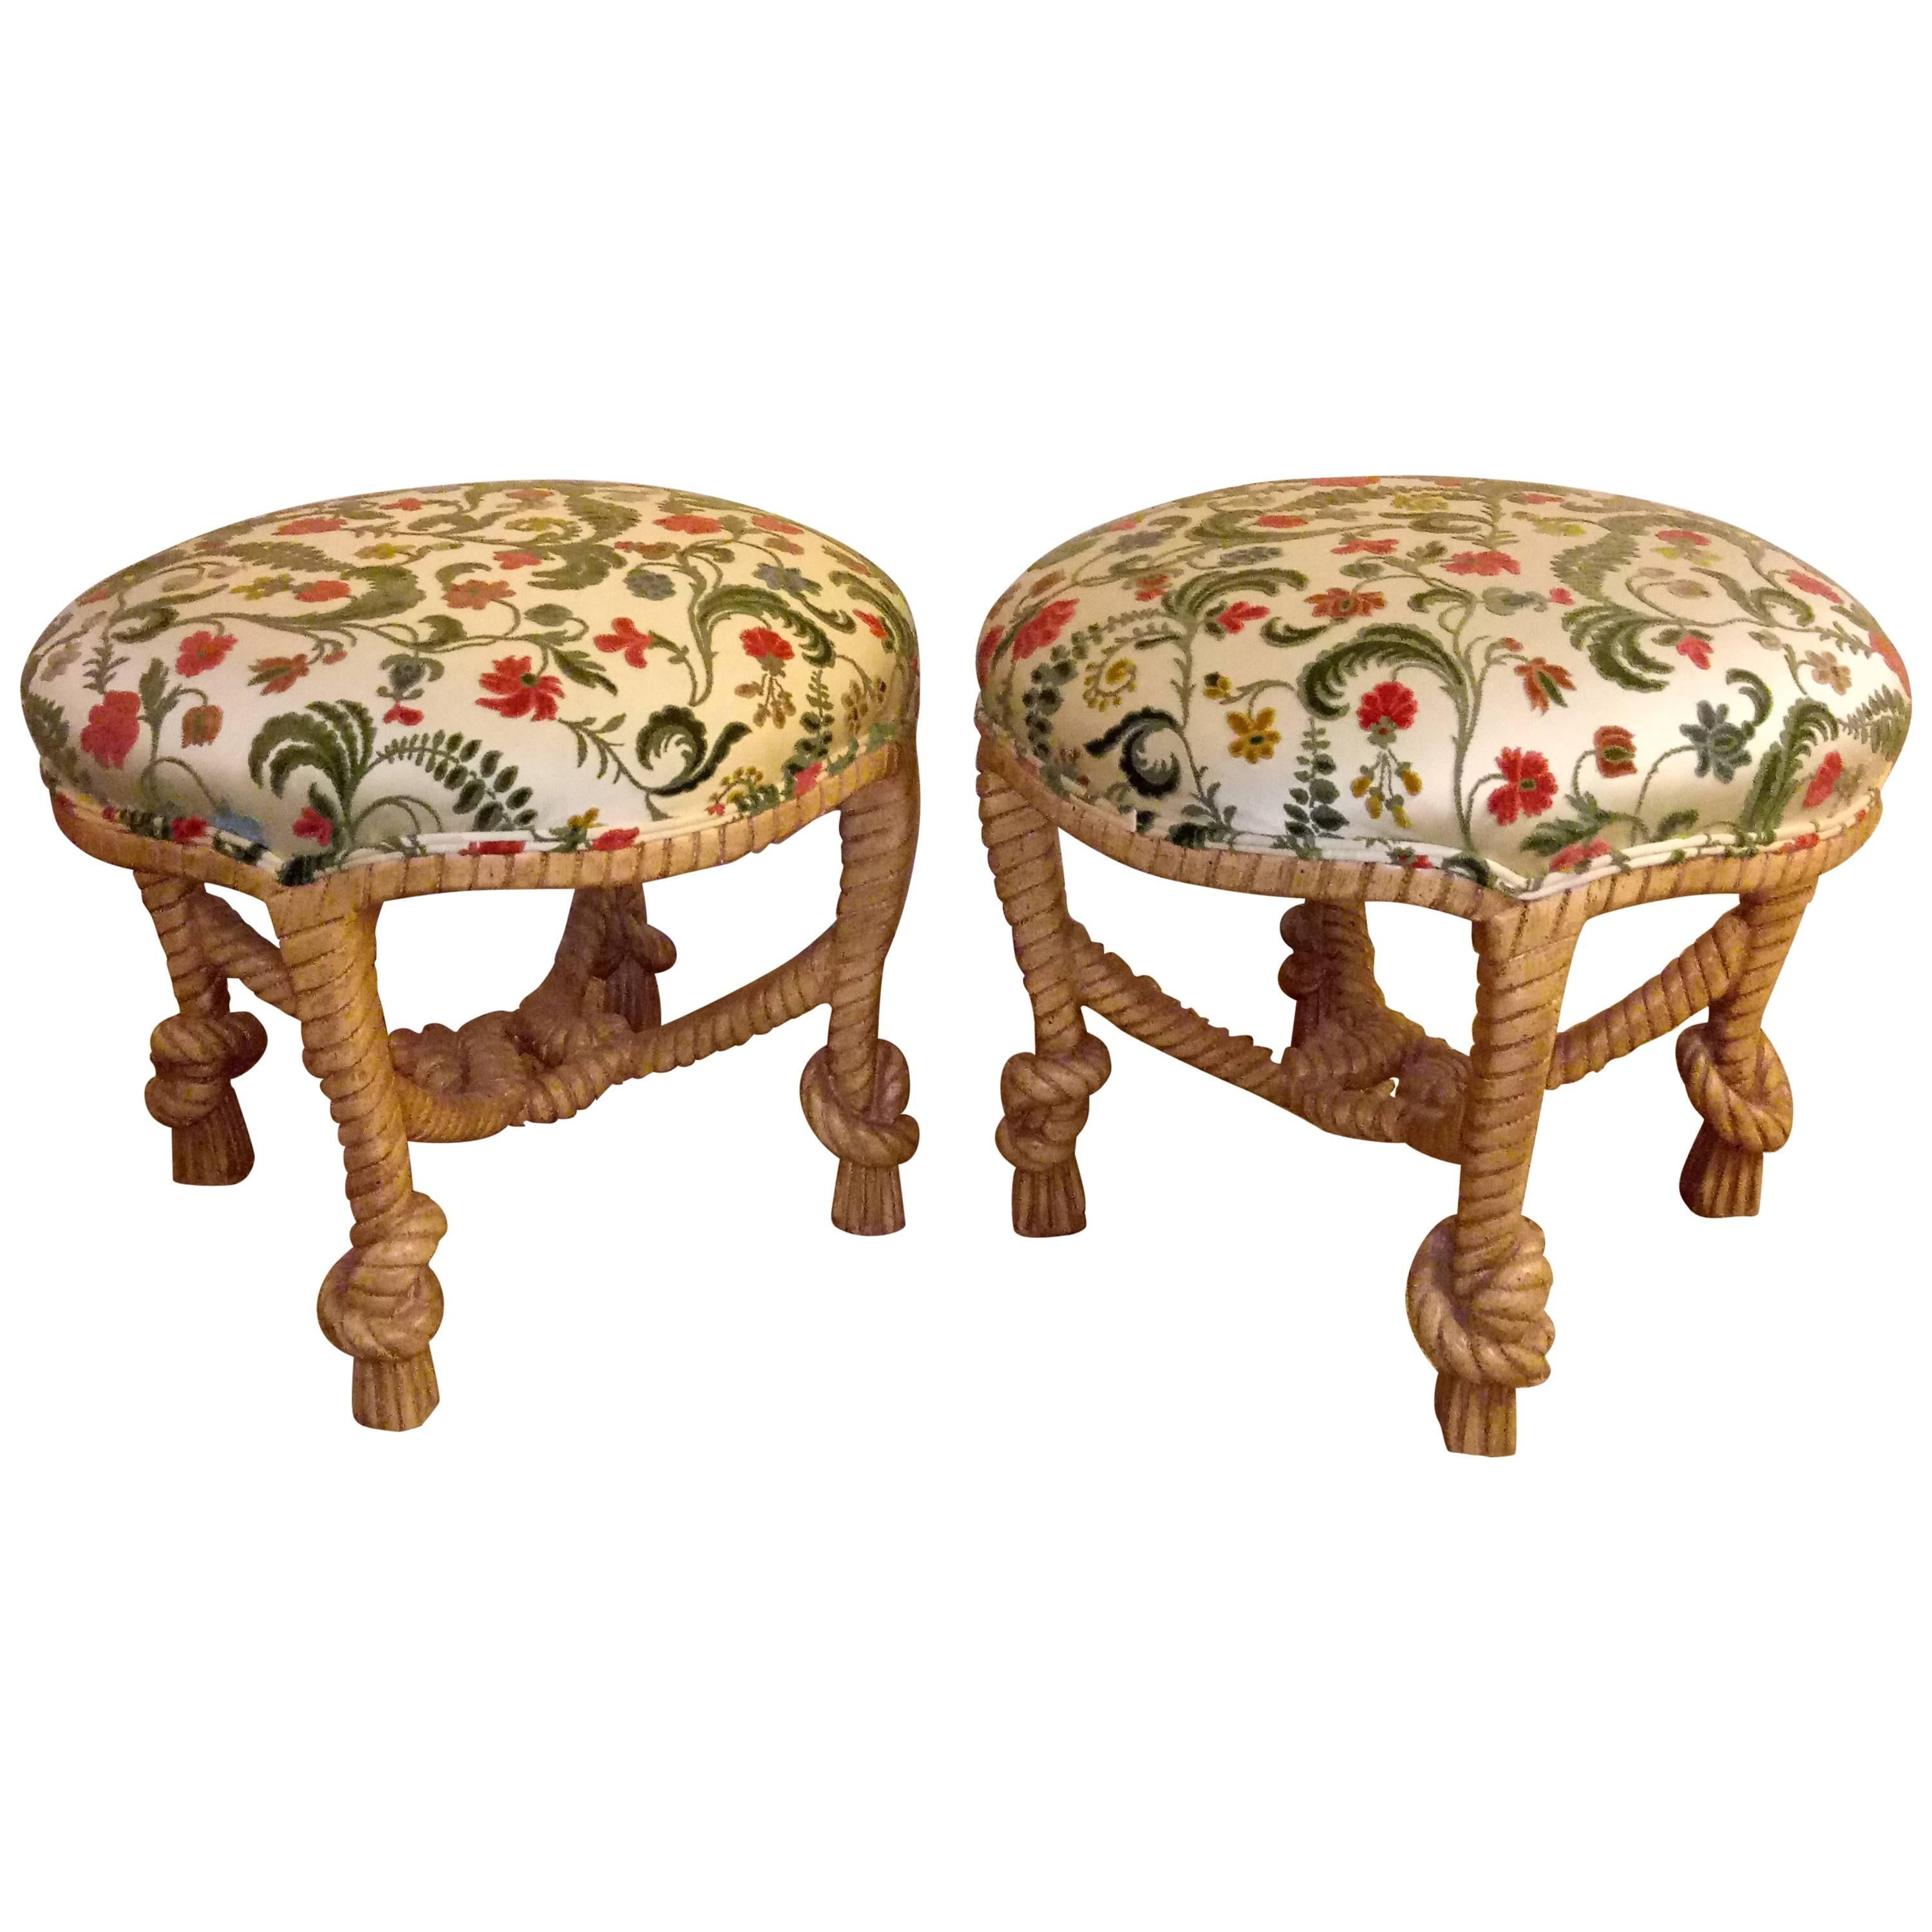 Pair of Rope Form Round Benches Stools 